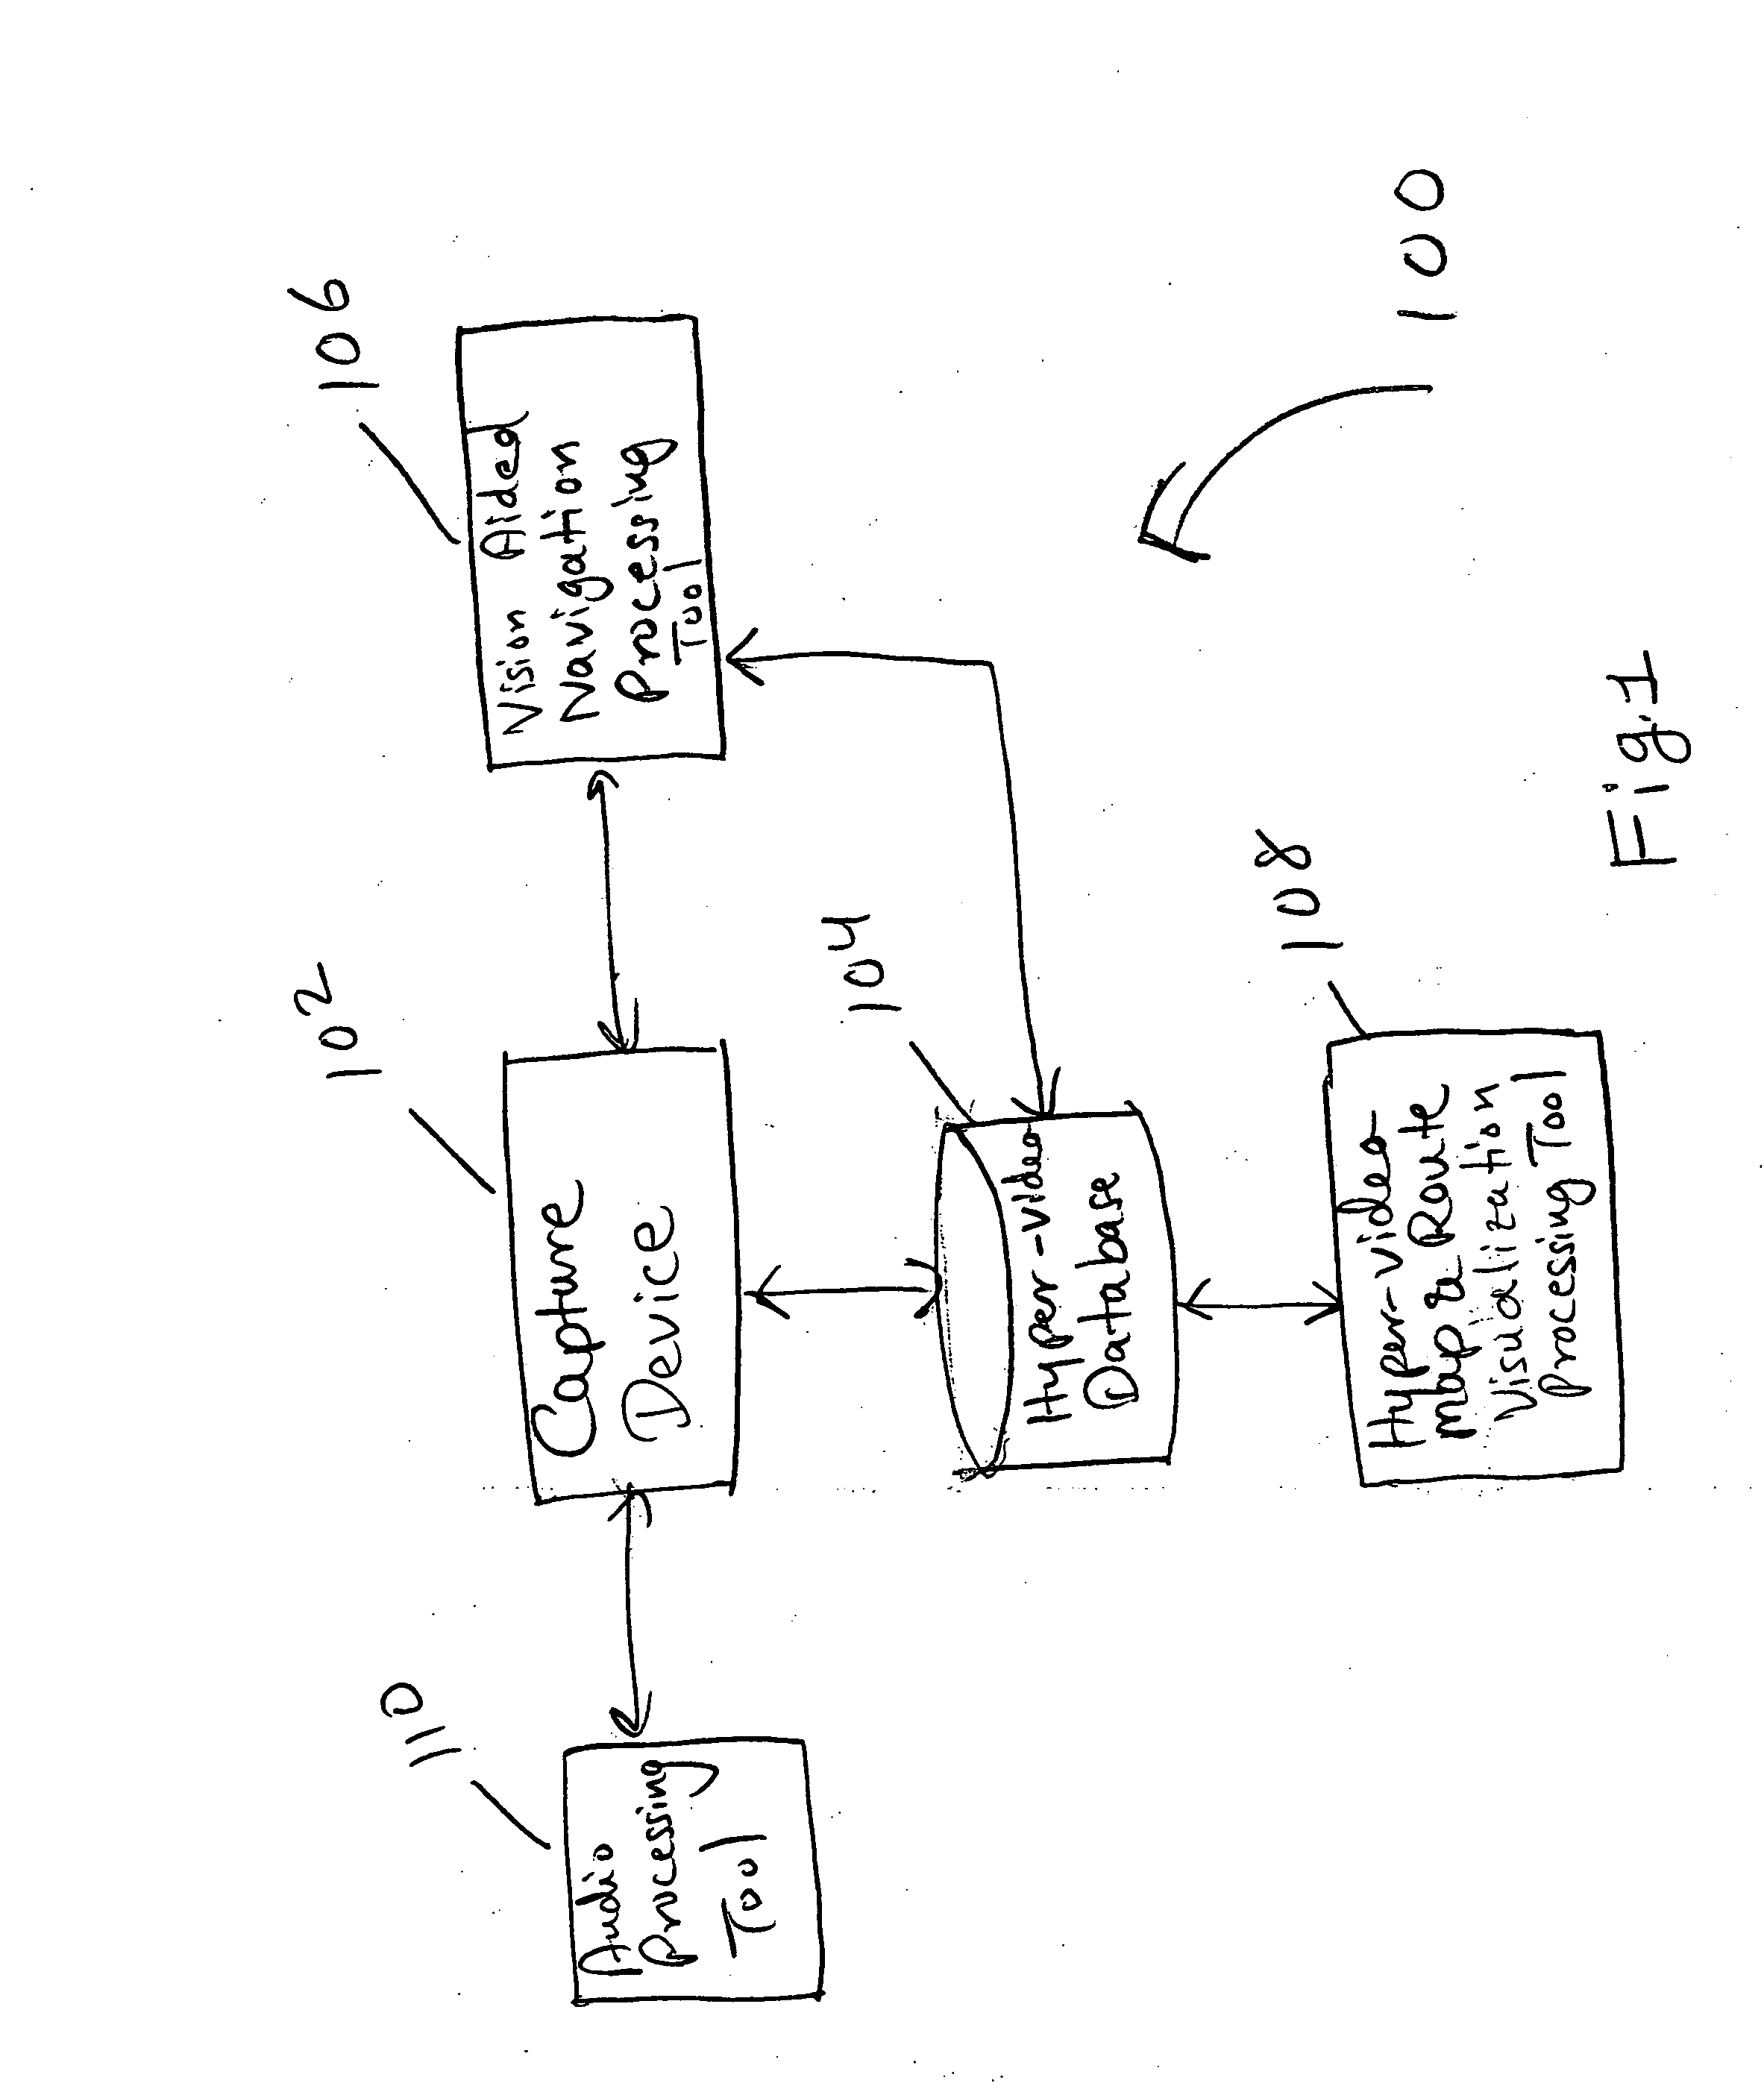 System and method for enhanced situation awareness and visualization of environments